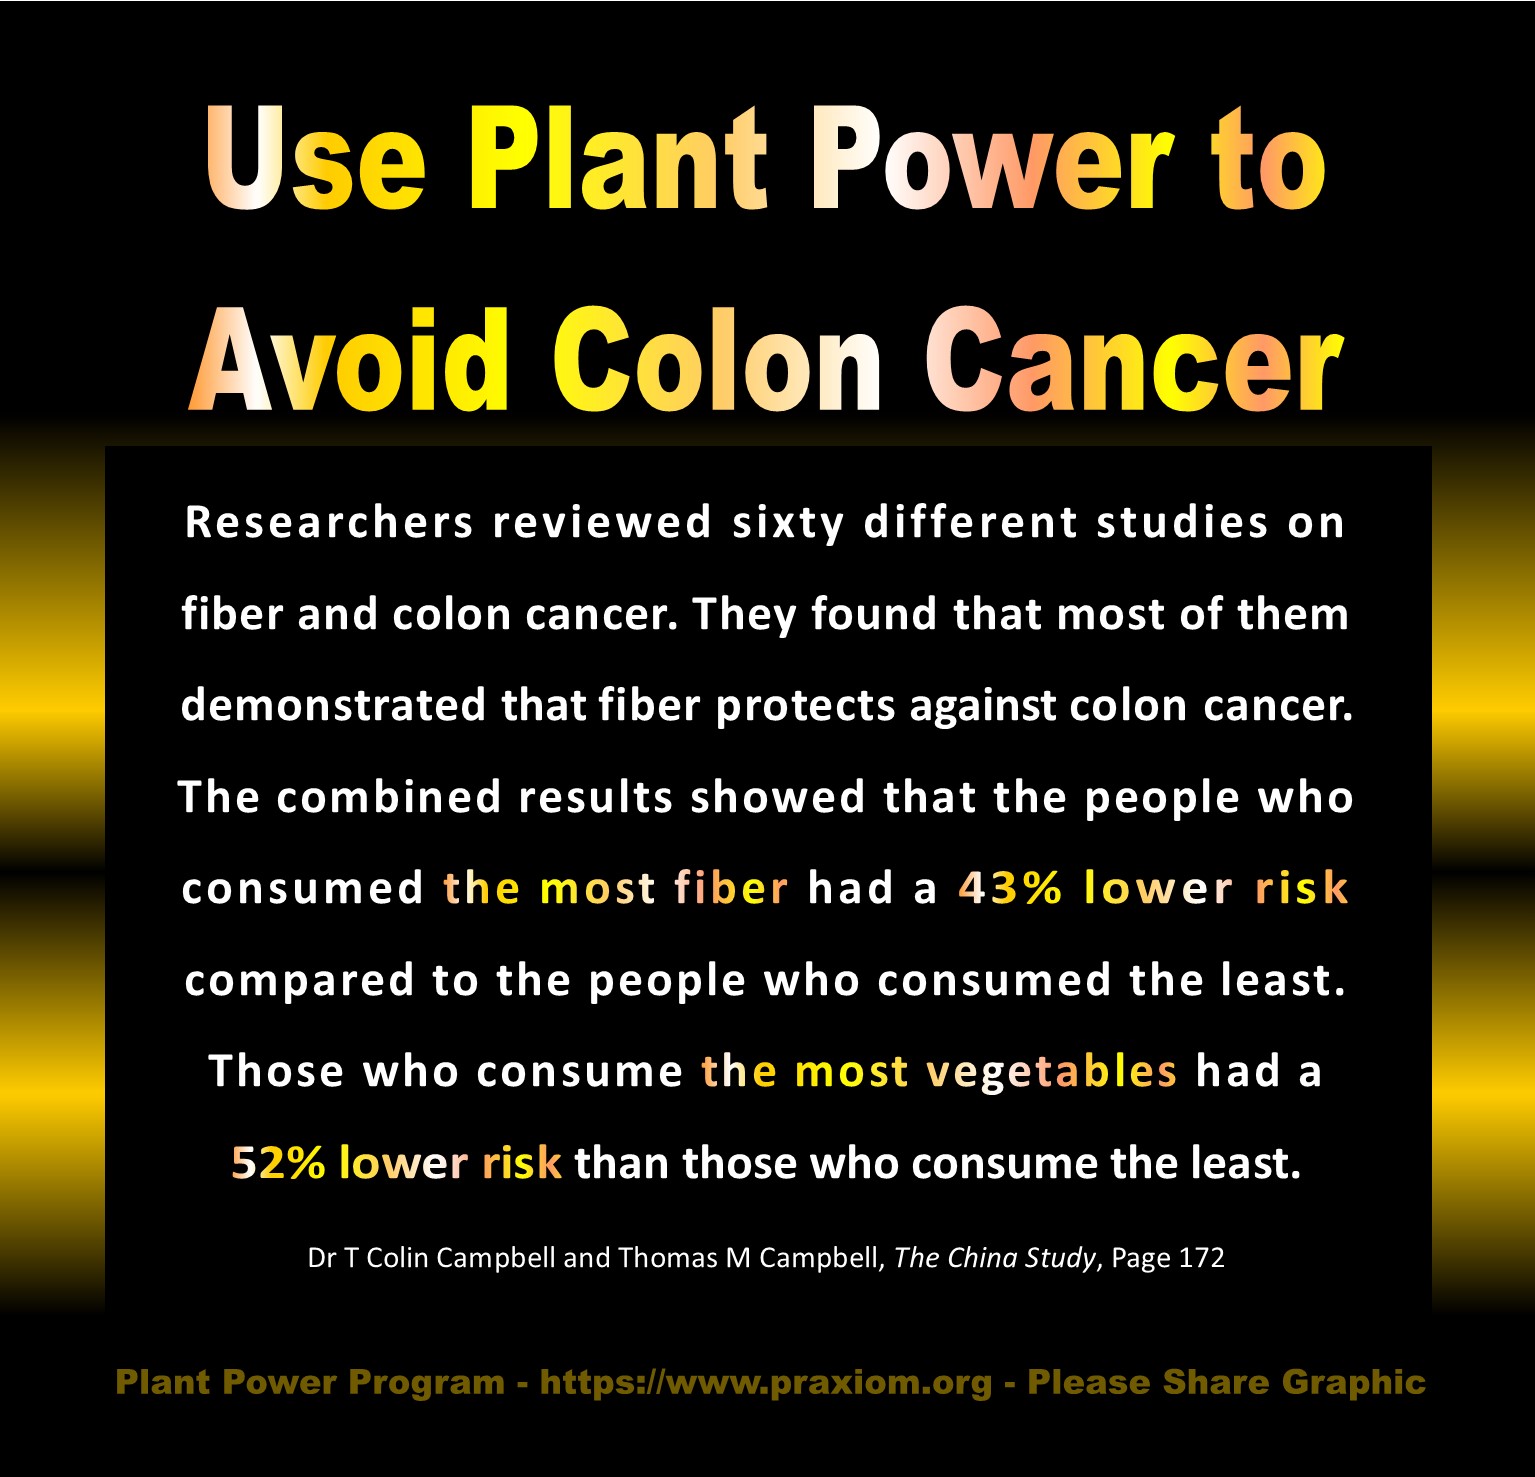 Use Plant Power to Avoid Colon Cancer - Dr. T Colin Campbell